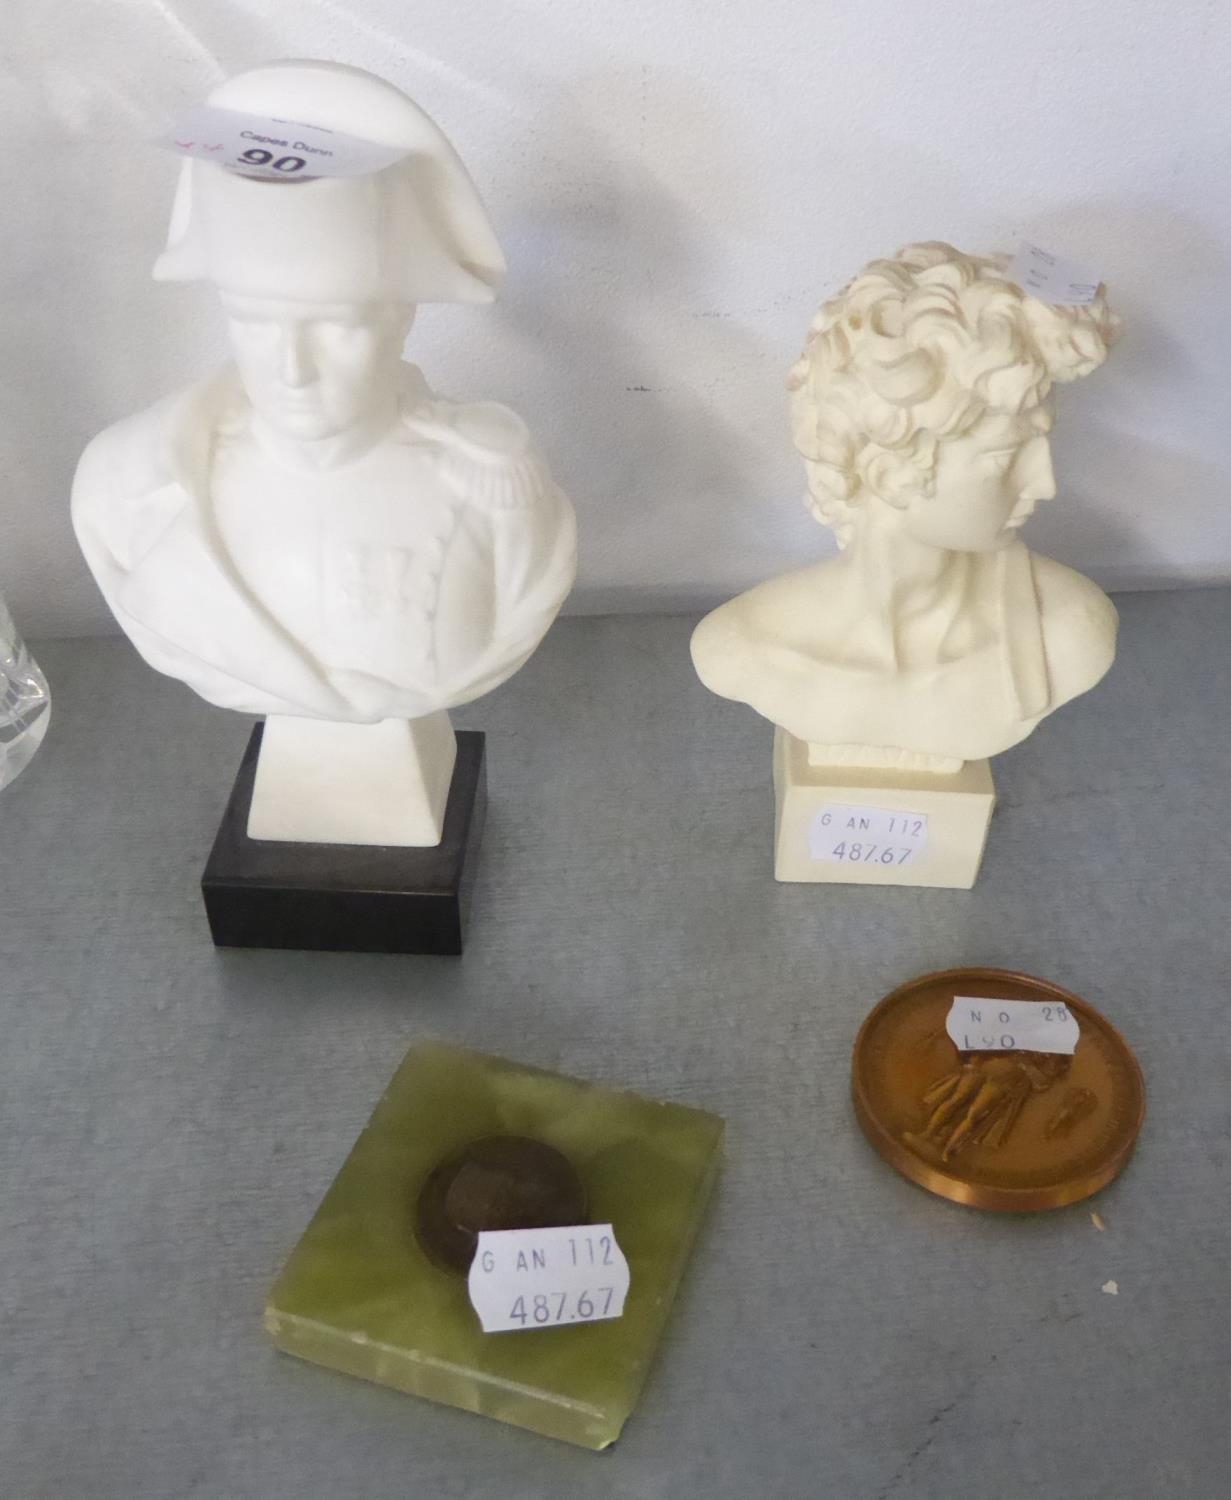 A WHITE COMPOSITION BUST OF NAPOLEON AND ANOTHER OF 'DAVID', A BRONZE MEDALLION FOR NAPOLEON,